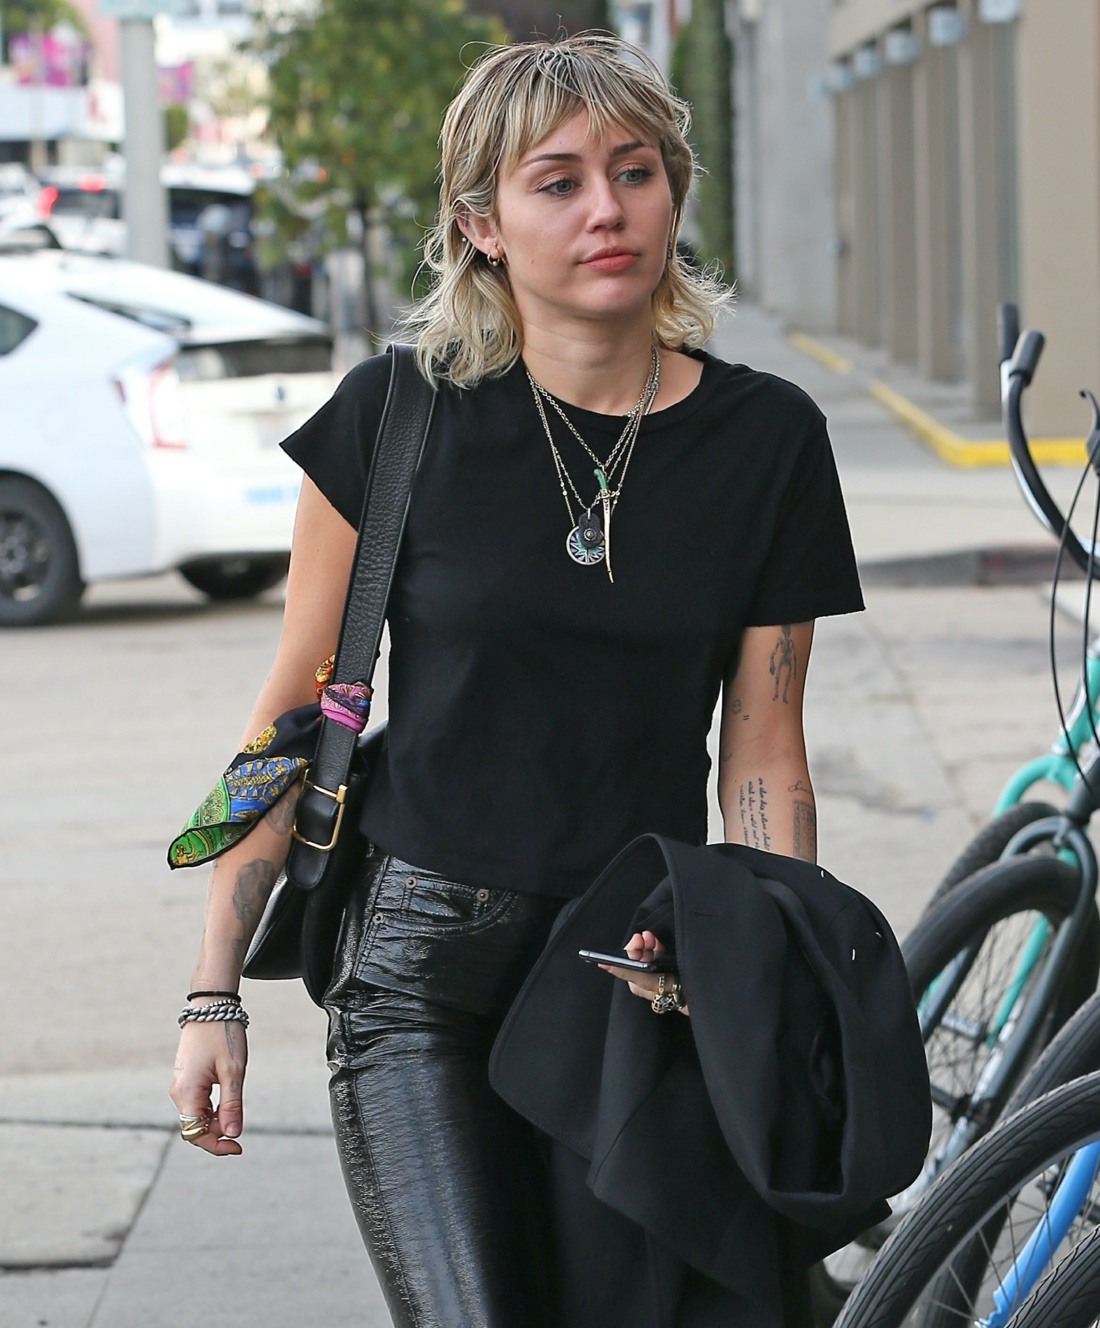 Miley Cyrus is looking relaxed and positive as she heads to the studio for a recording session in West Hollywood